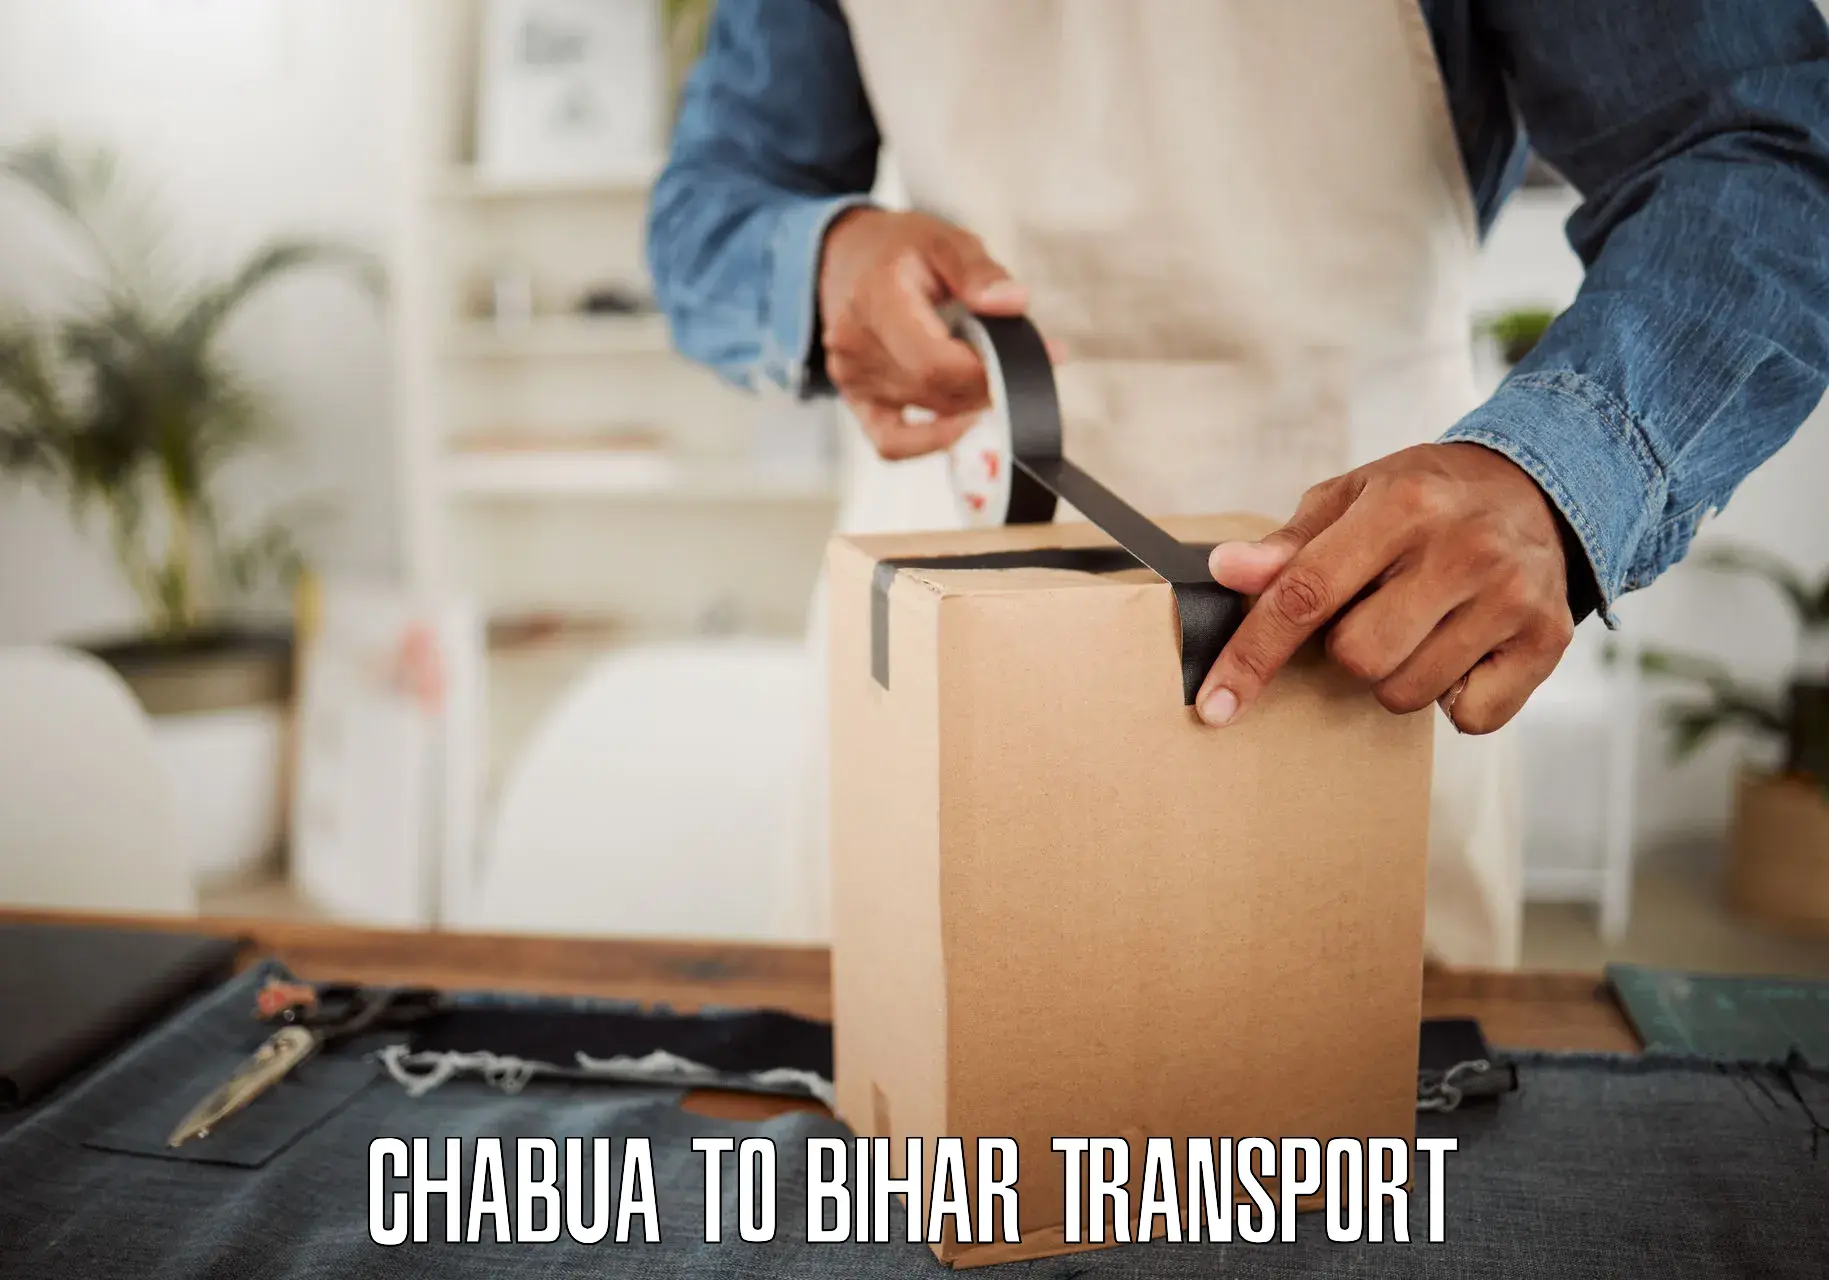 Air freight transport services Chabua to Dhaka